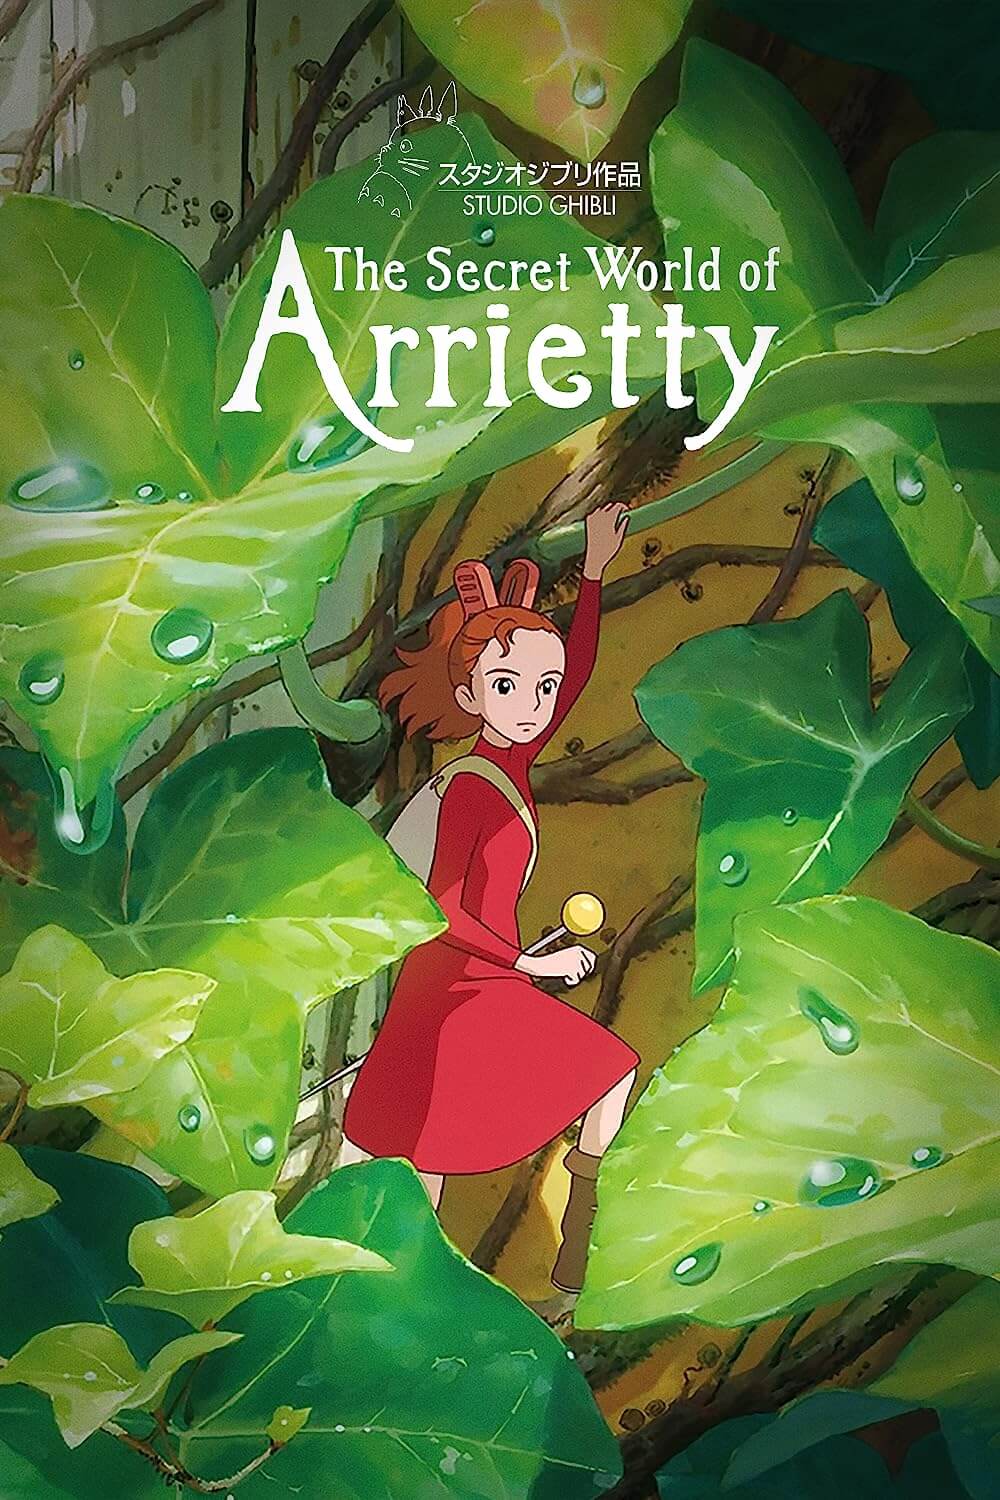 The Secret World of Arrietty is among the best movies for 7 year olds on Netflix.